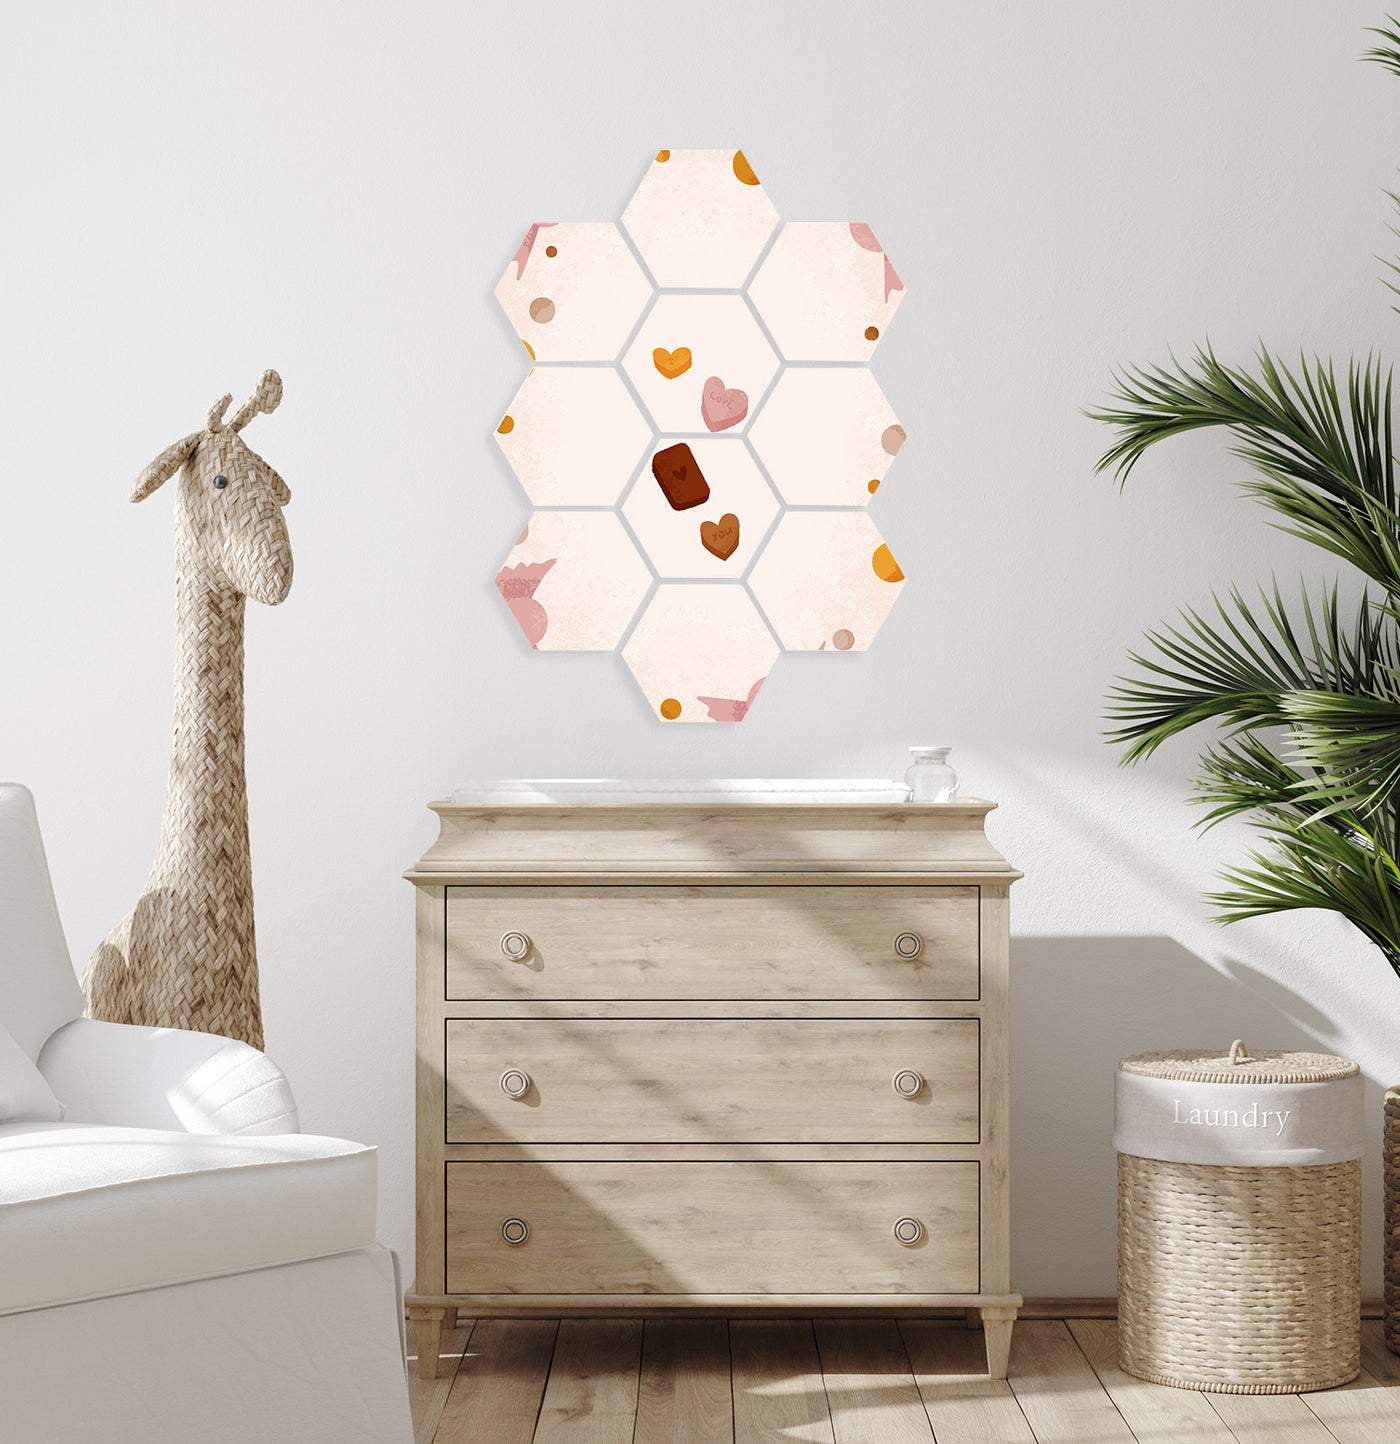 Hexagons Born to be Sweet Candy Love - 58xH79 cm